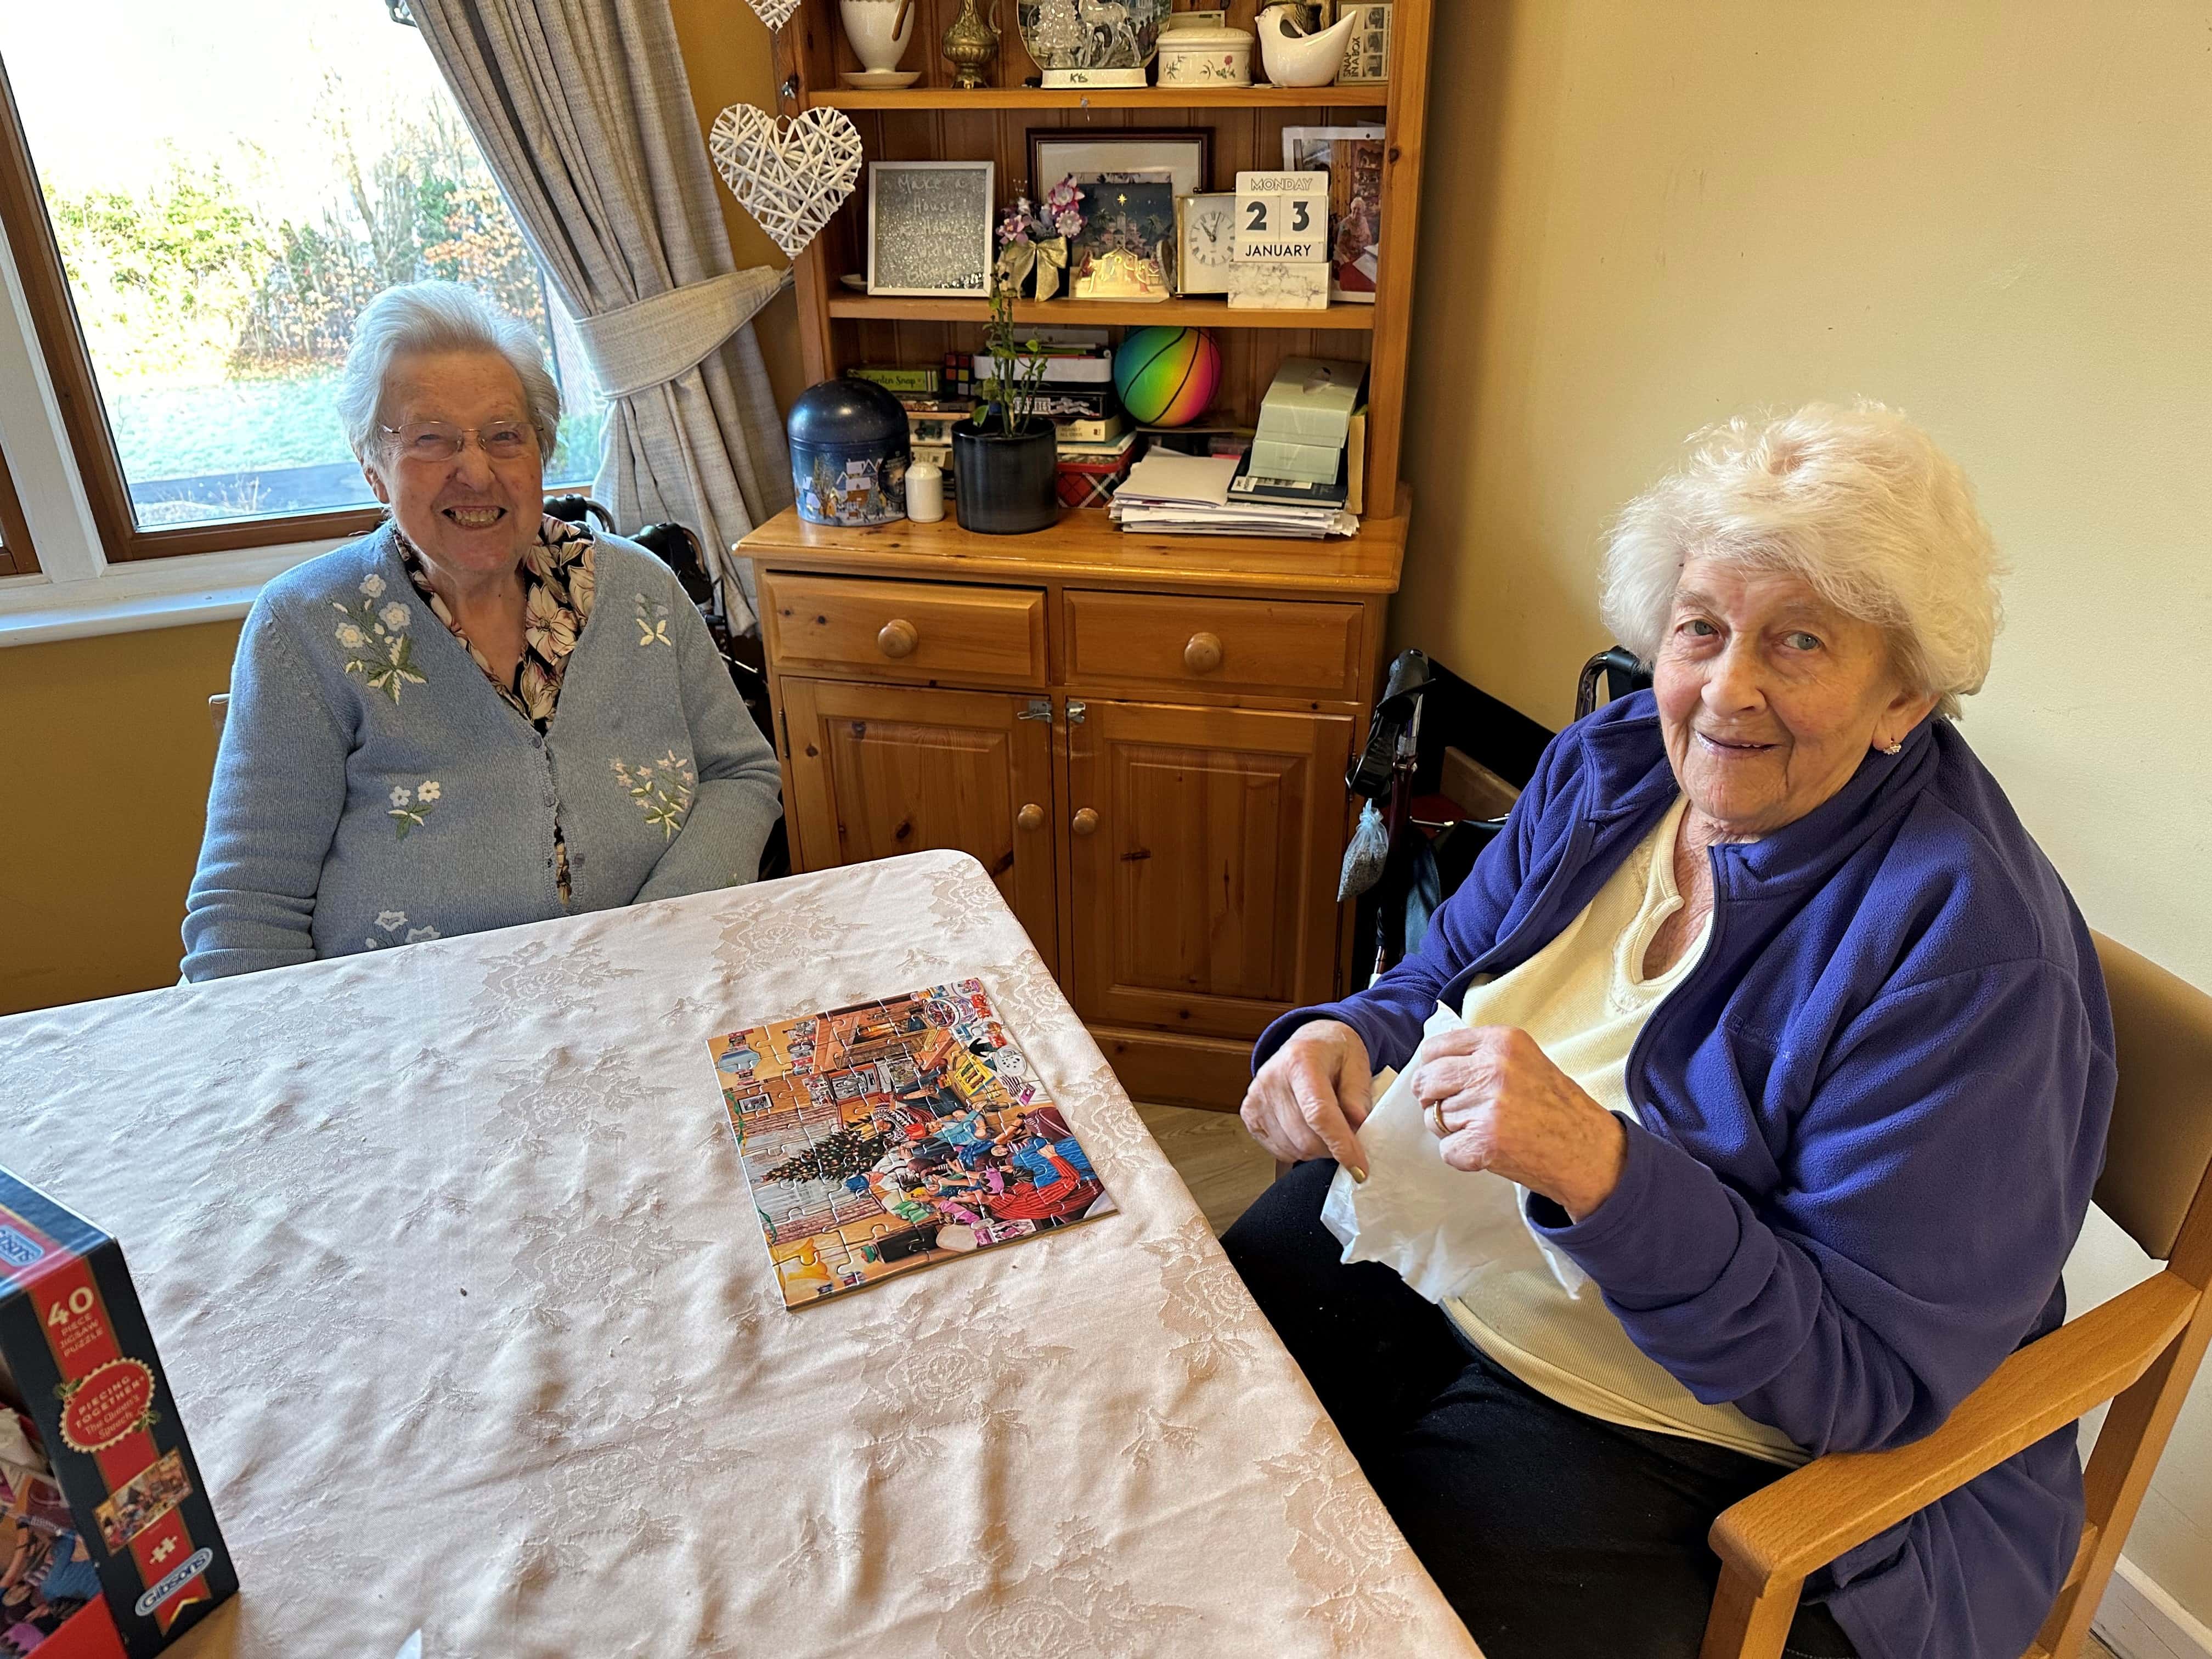 Ladies doing a jigsaw puzzle